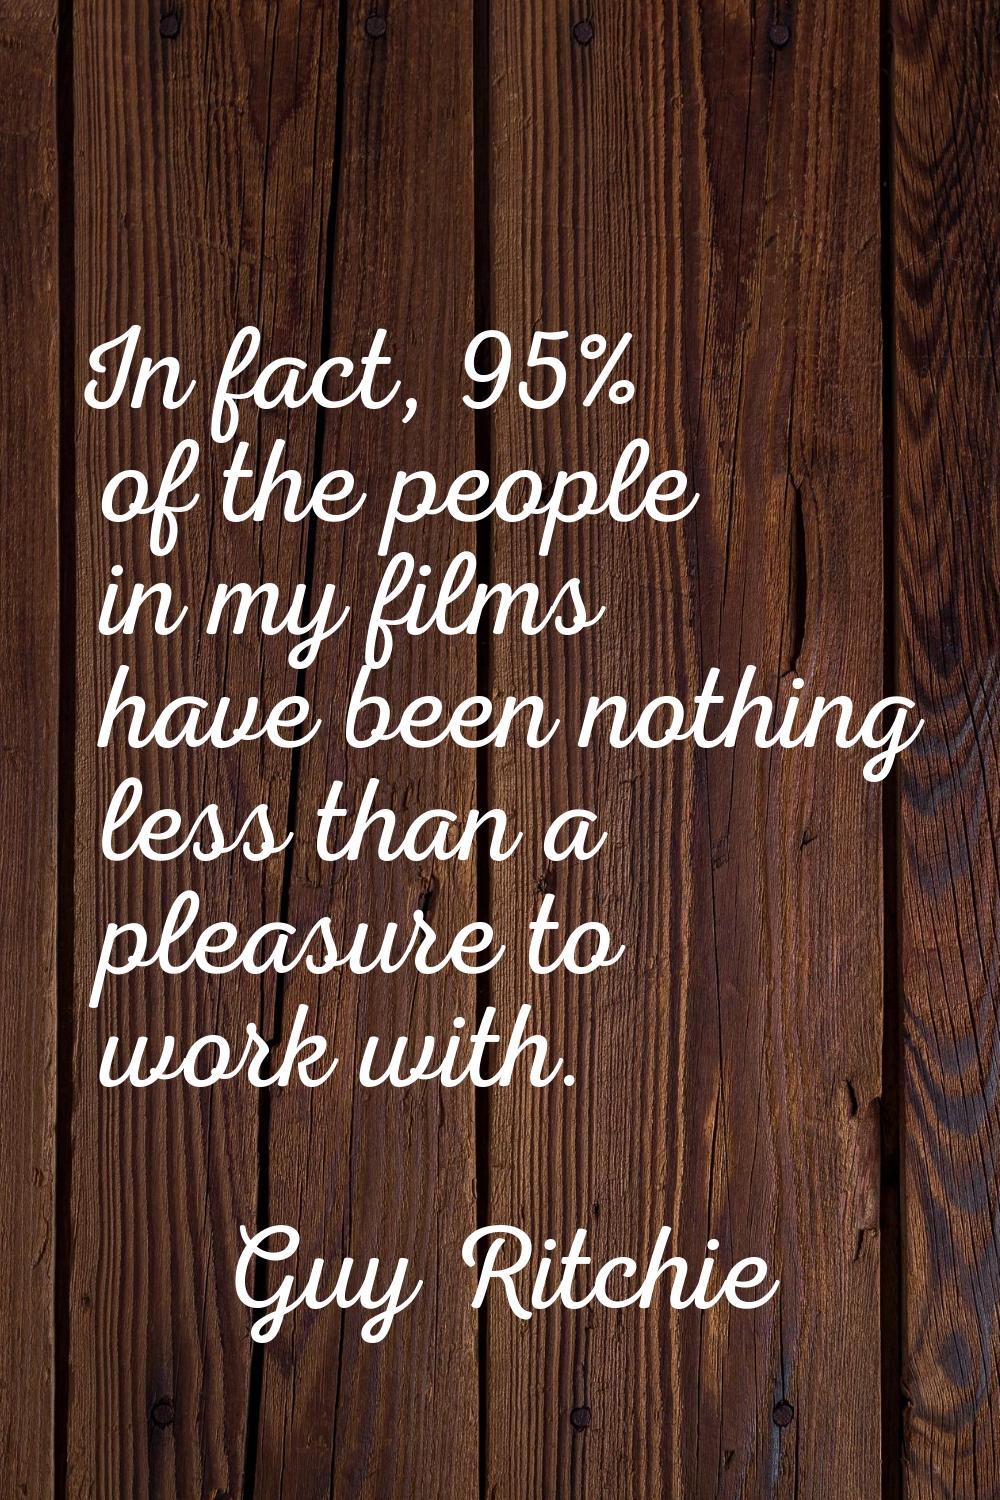 In fact, 95% of the people in my films have been nothing less than a pleasure to work with.